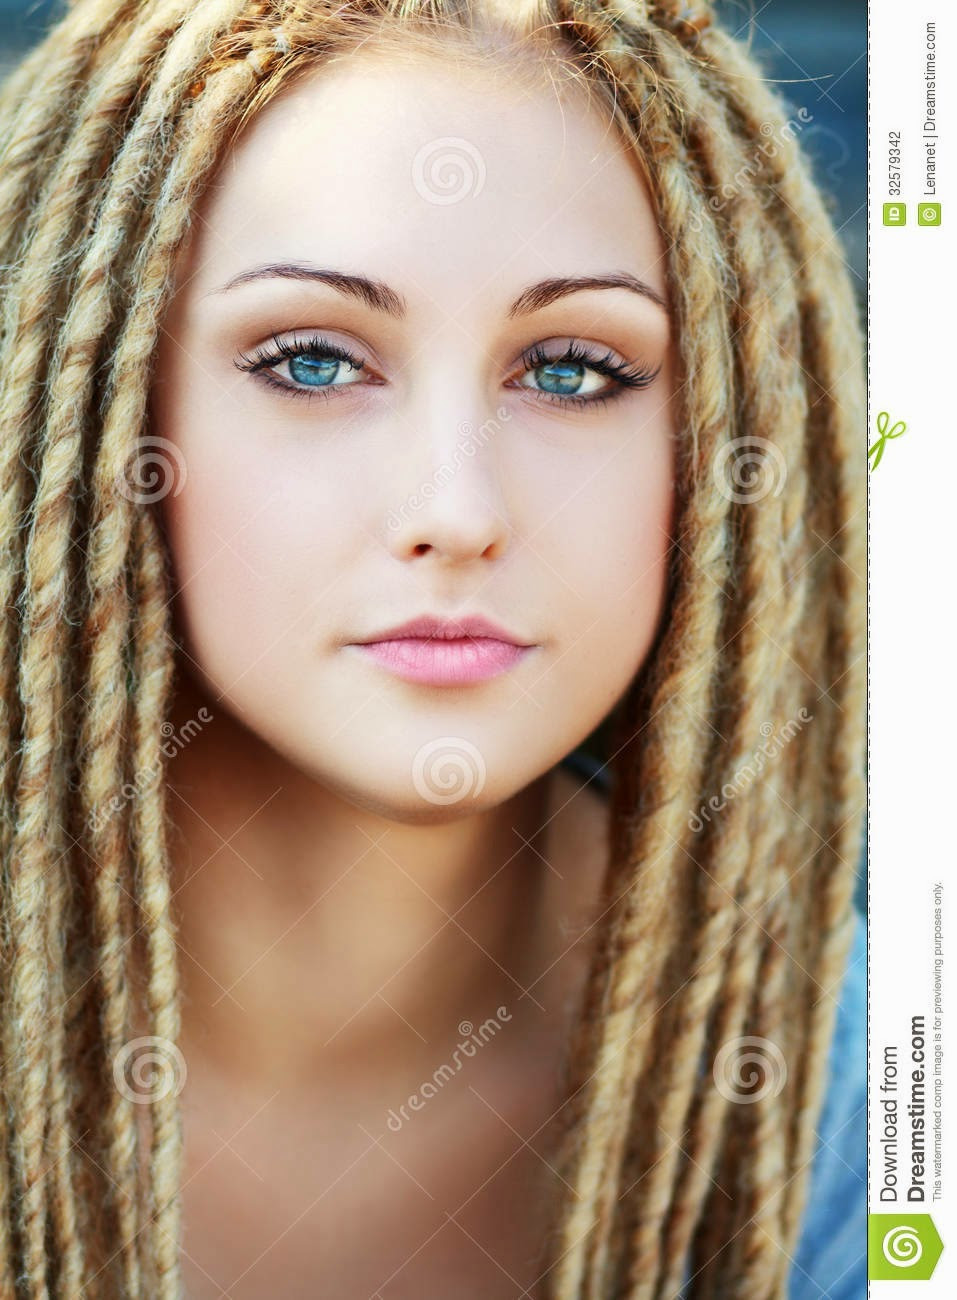 White Girl Dread Hairstyles
 White women with dreads